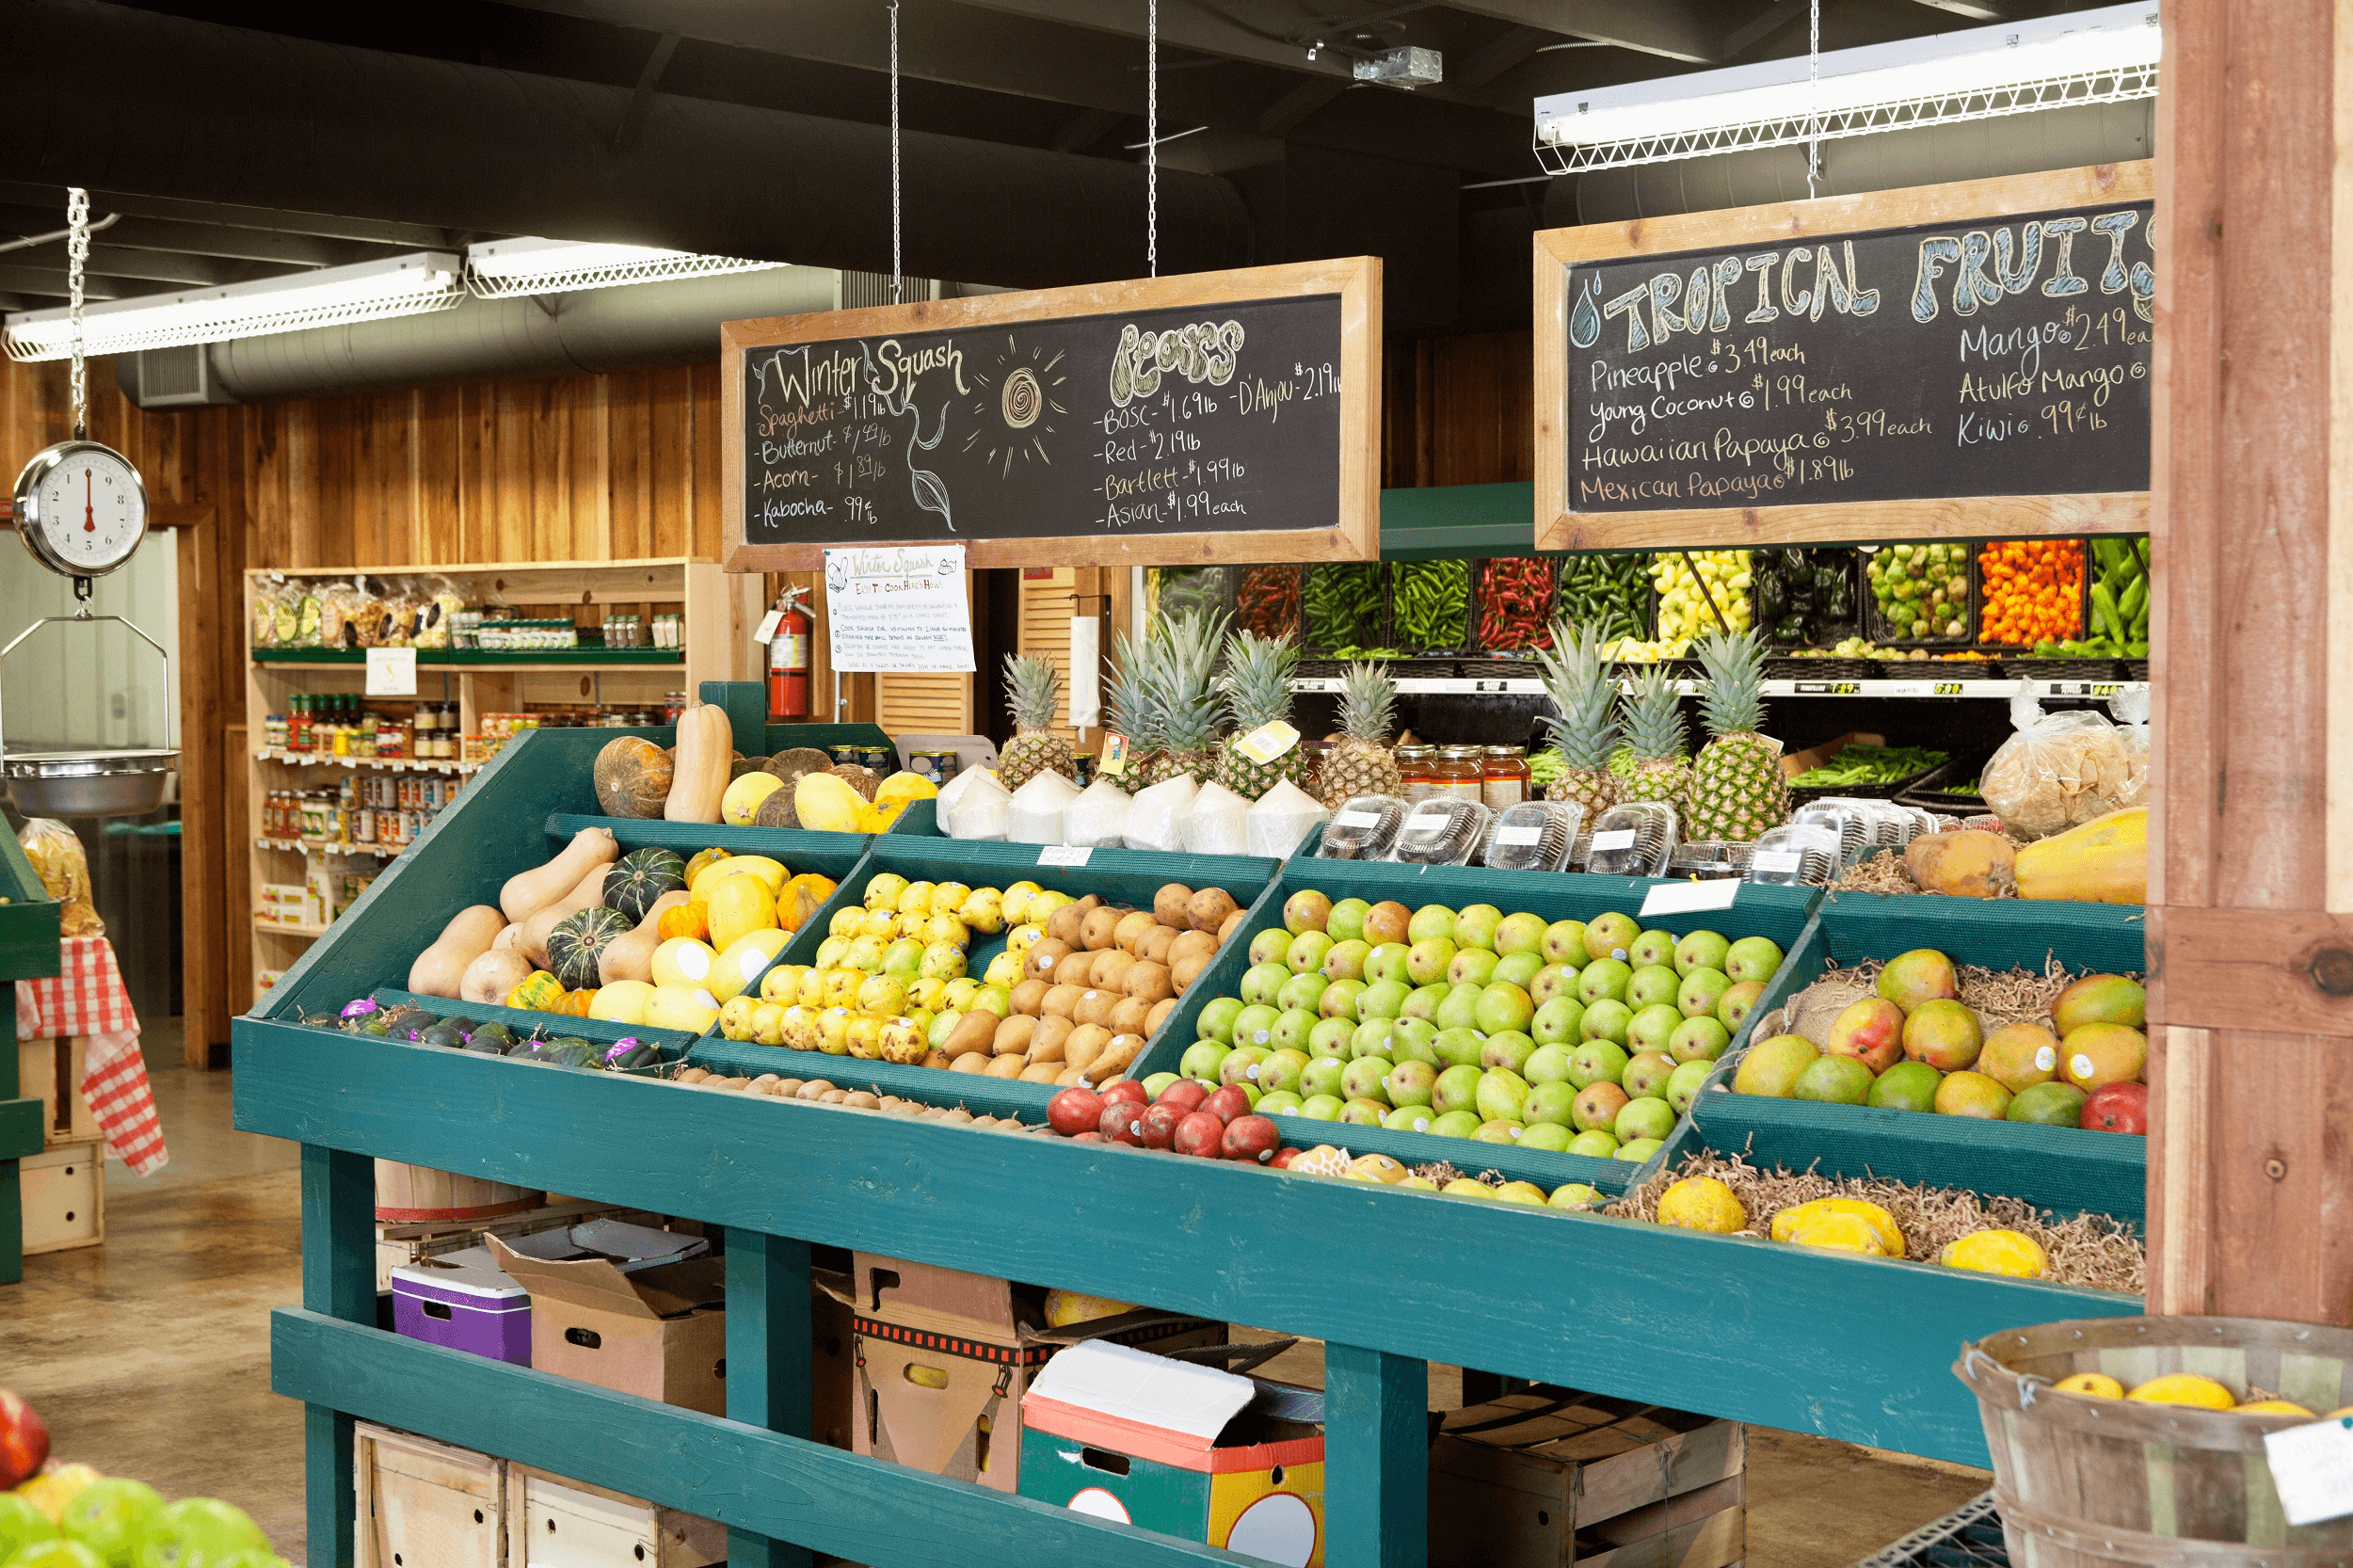 fruit and produce on display in market